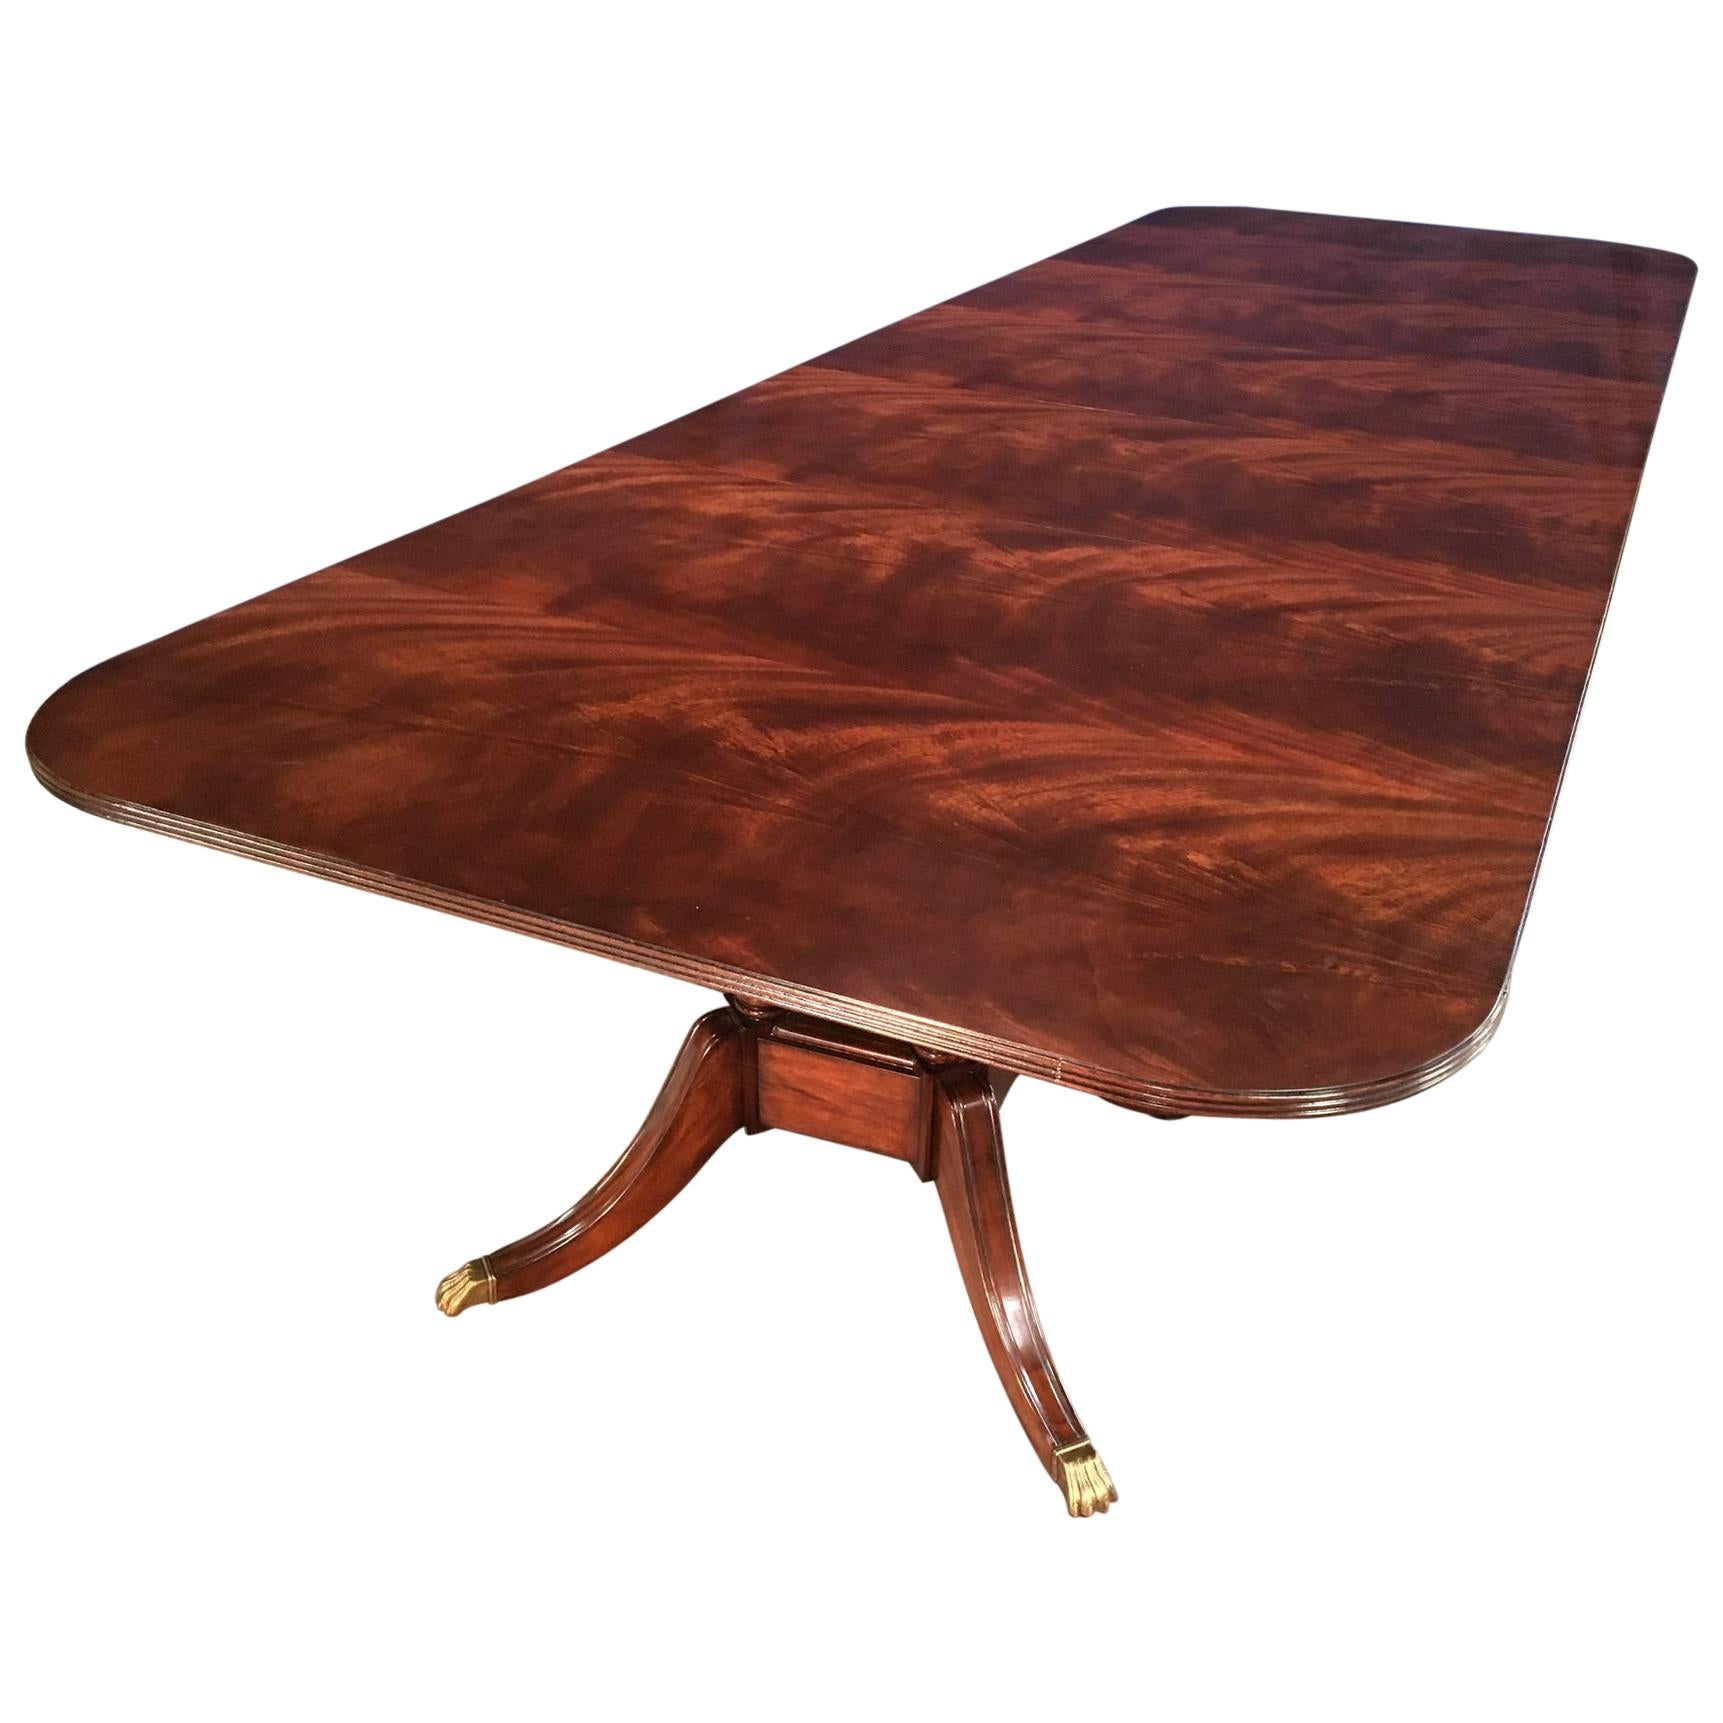 Large Crotch Mahogany Georgian Style Dining Table by Leighton Hall For Sale